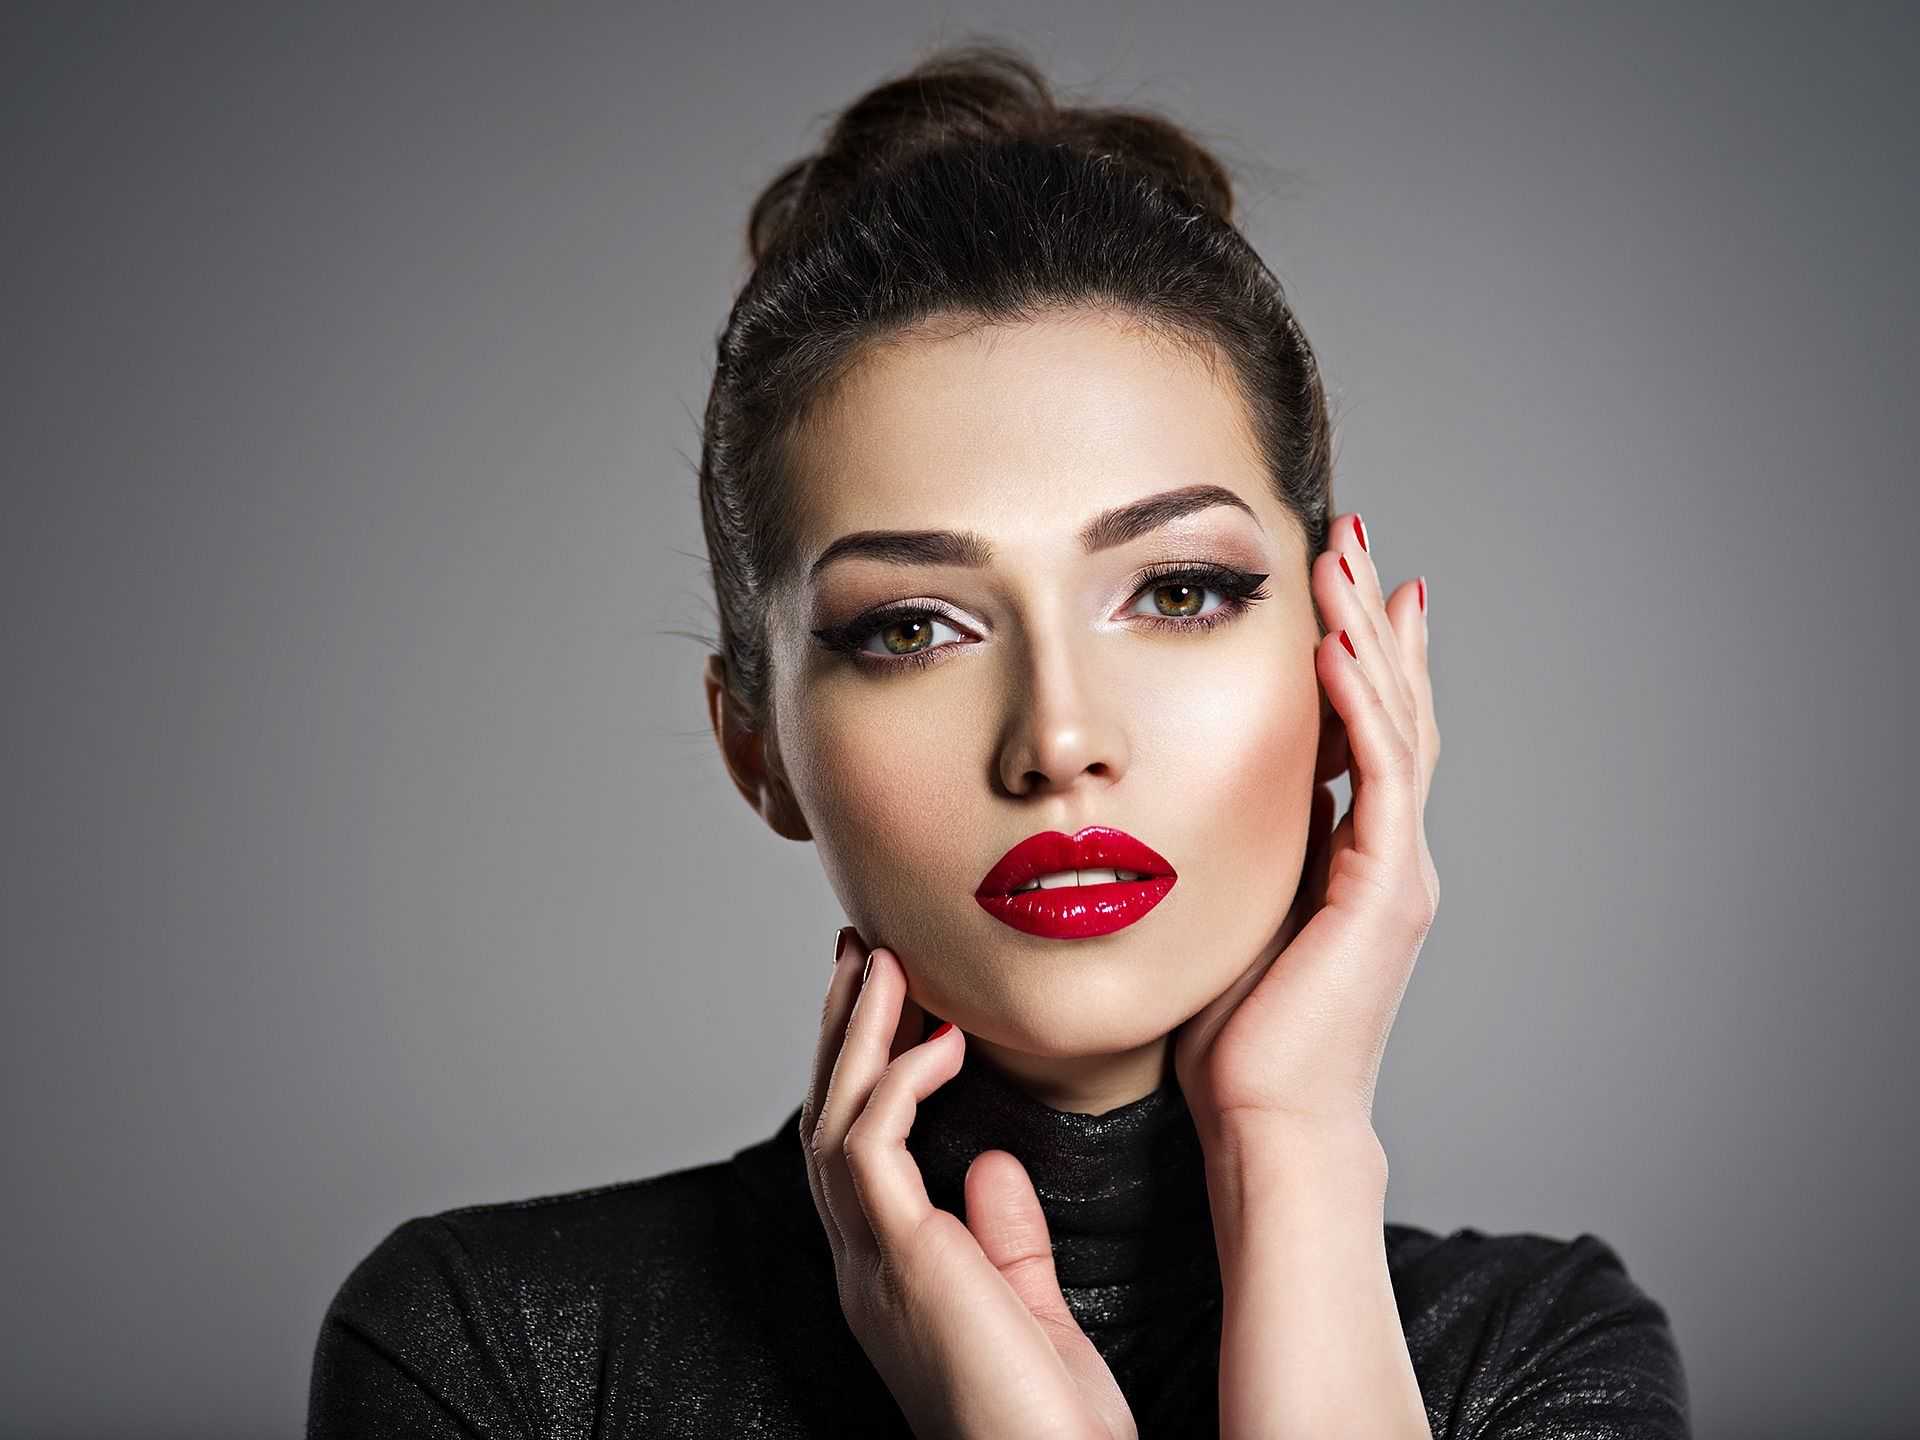 Woman with bold makeup posing with hands on face.